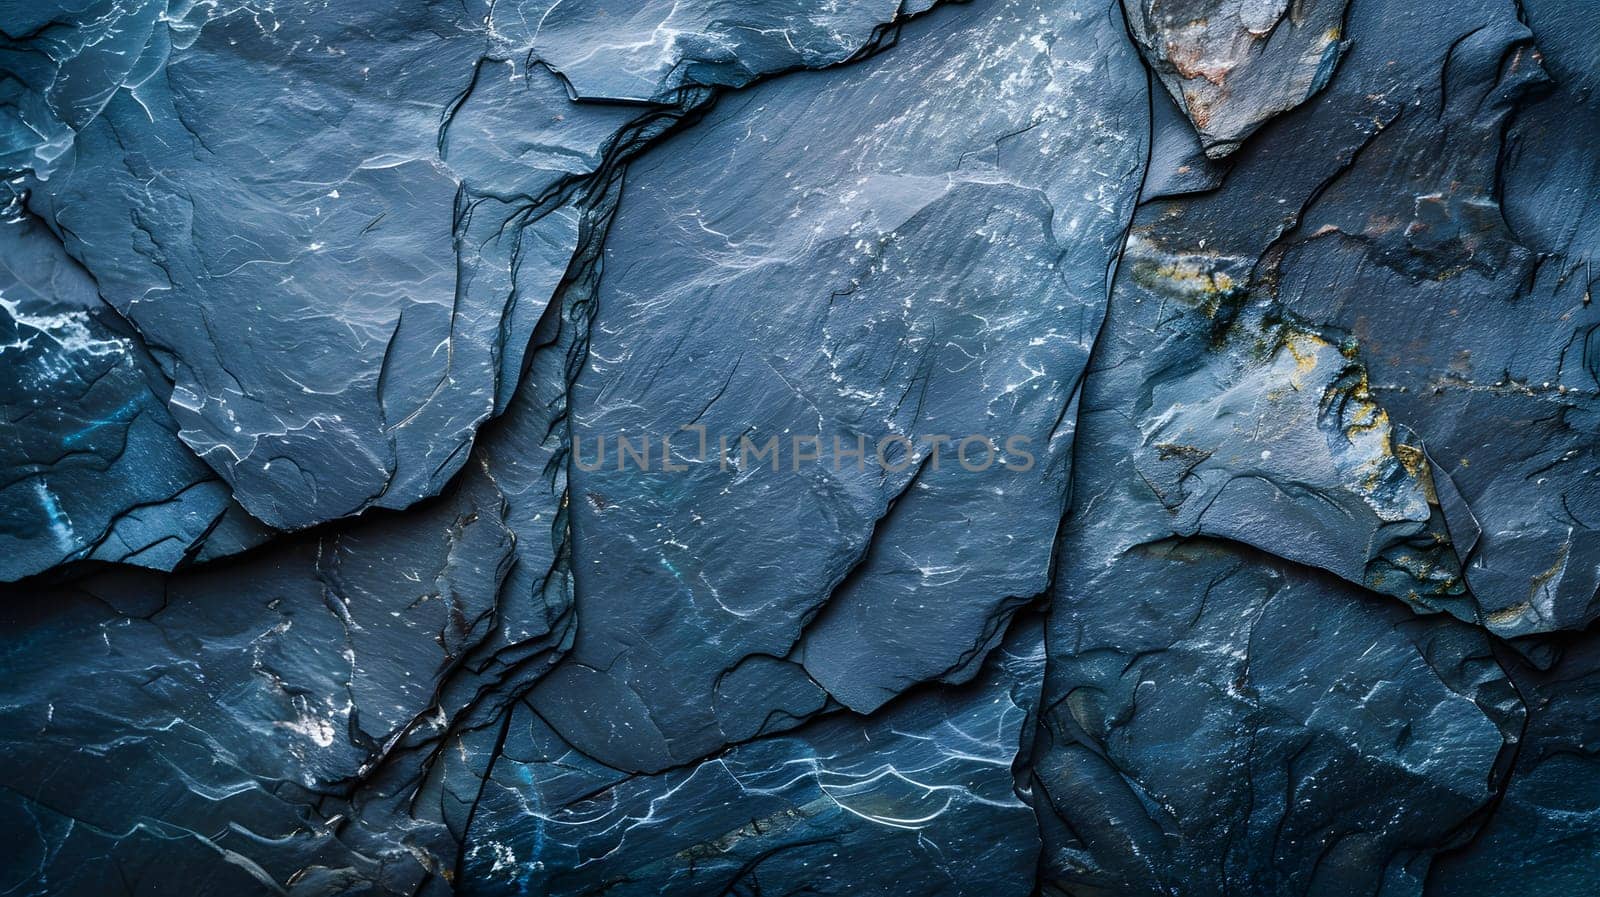 A close up of a bedrock wall with an electric blue marble texture, creating a stunning pattern in the darkness. The rock resembles an automotive tire with water intrusion marks